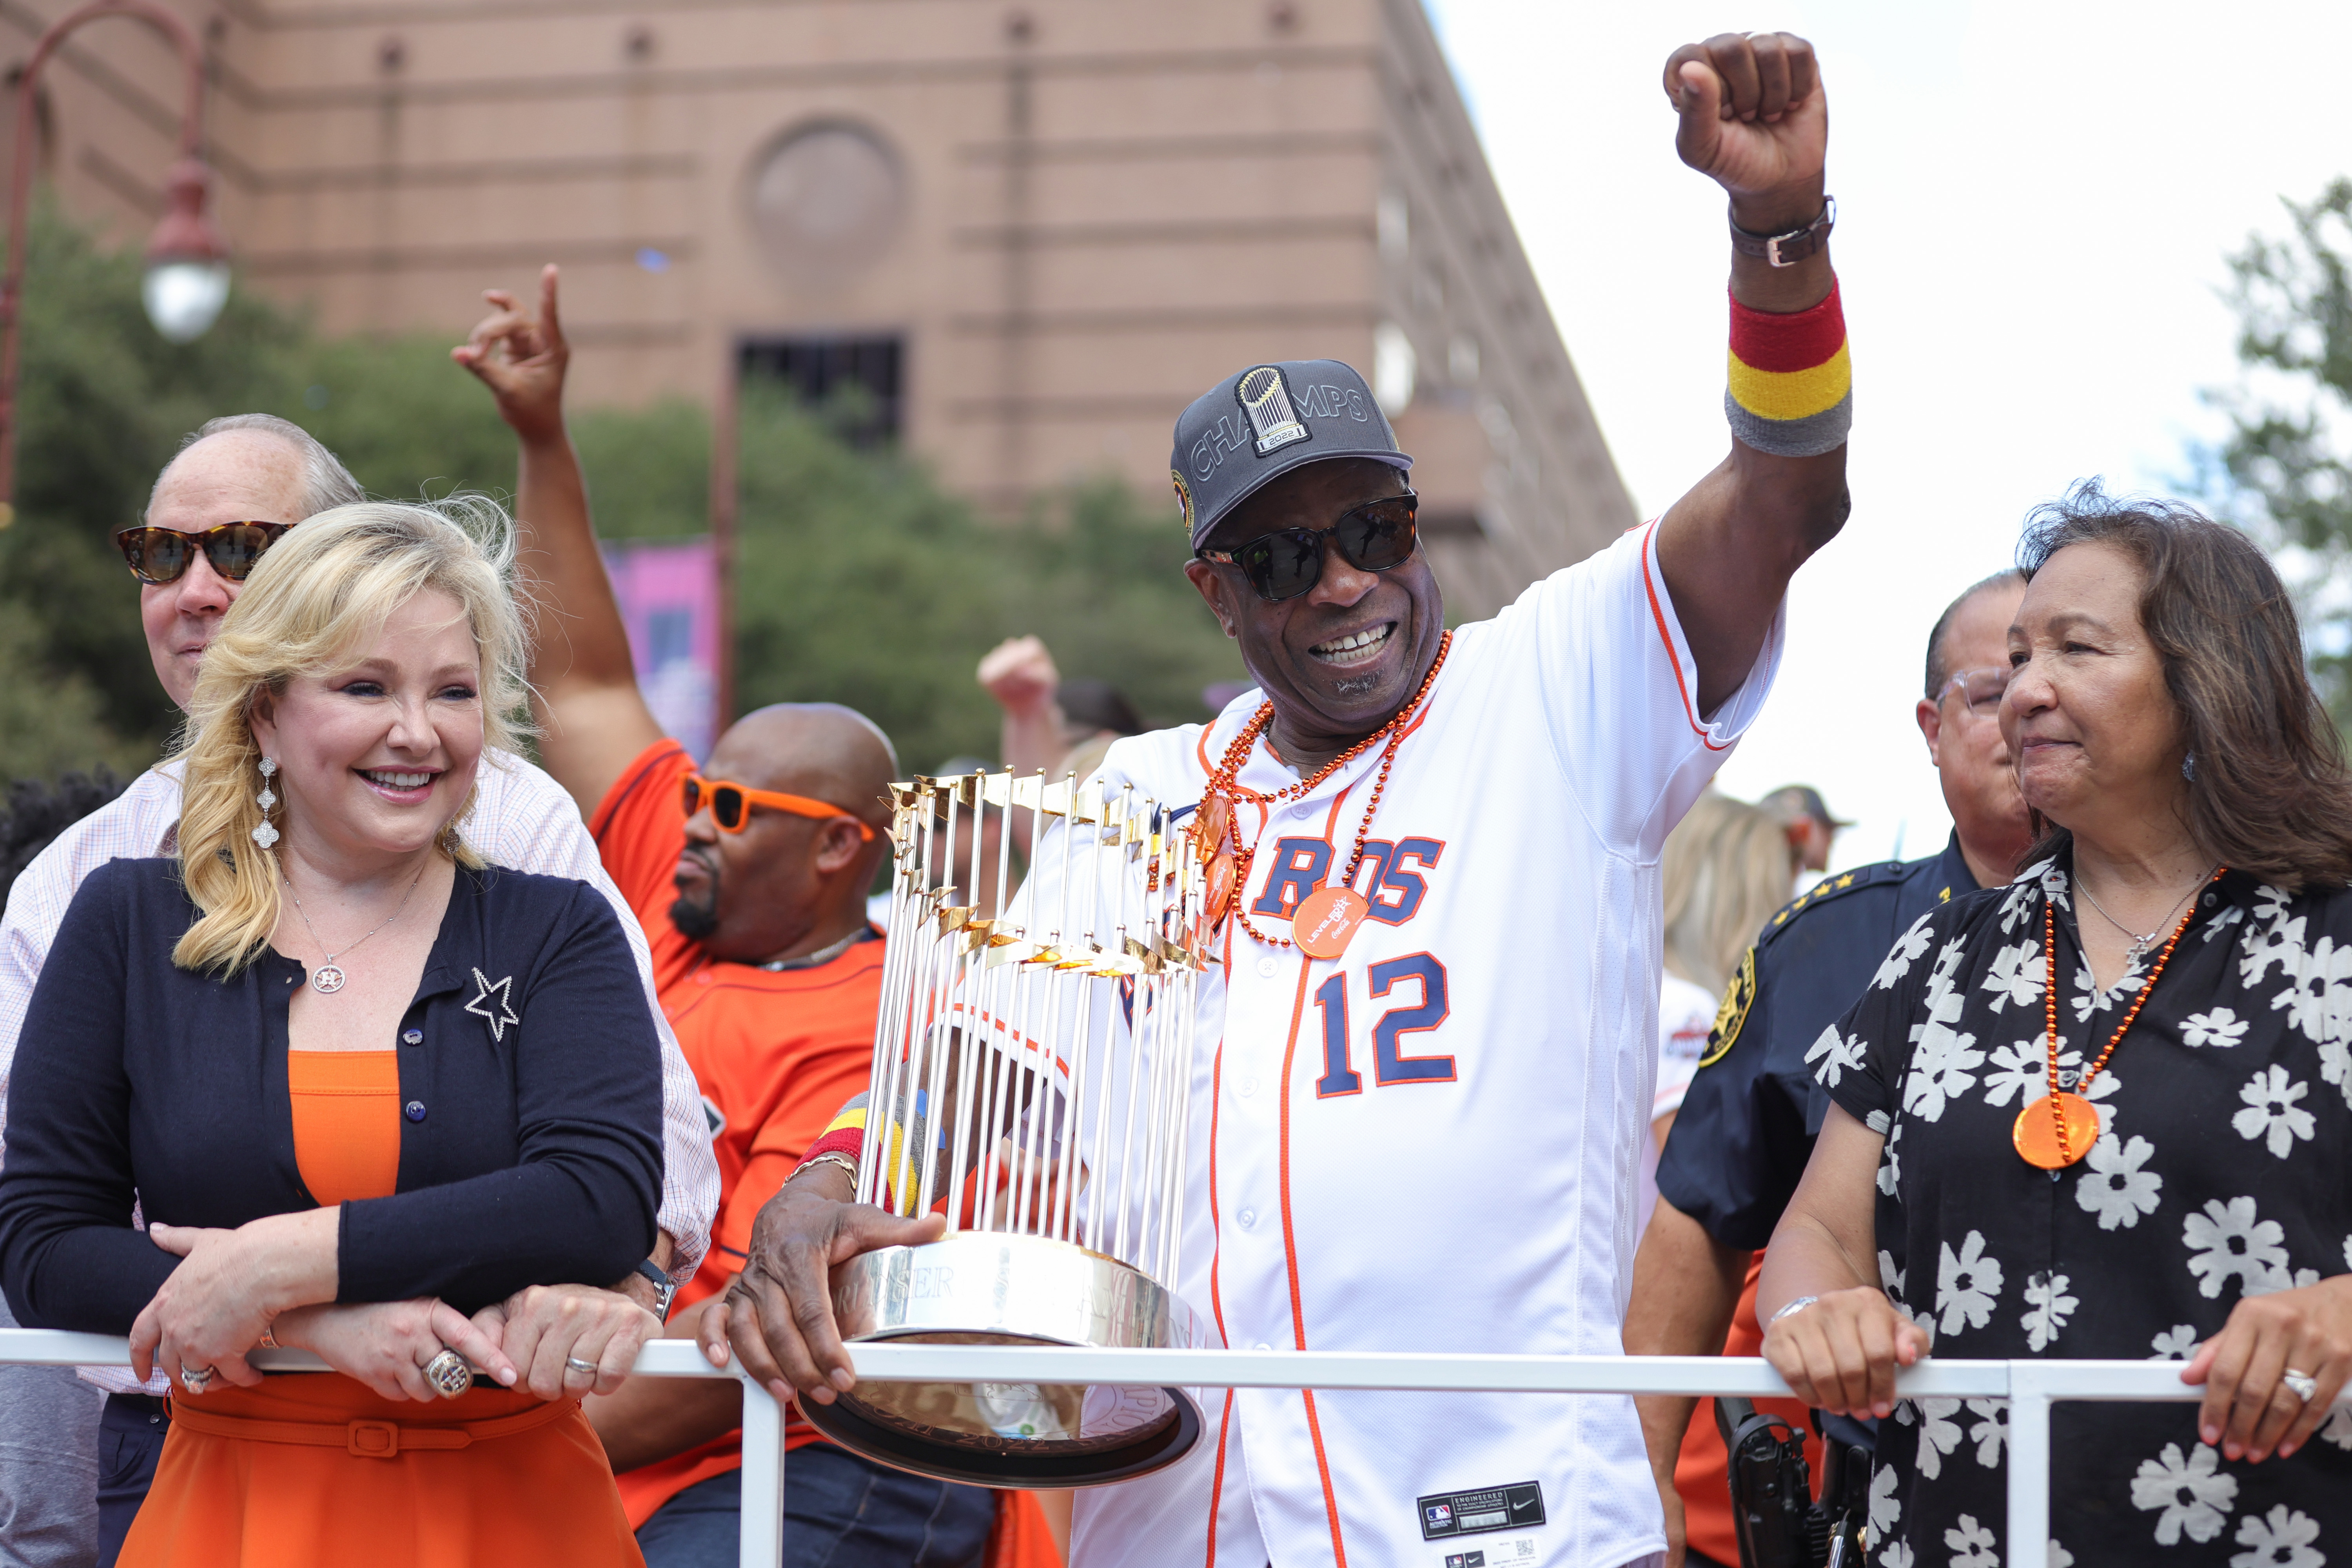 Dusty Baker (C), manager of the houston Astros, celebrates with the MLB World Series championship trophy, the Commissioner's Trophy, during the parade in Houston, Texas, November 7, 2022. /CFP